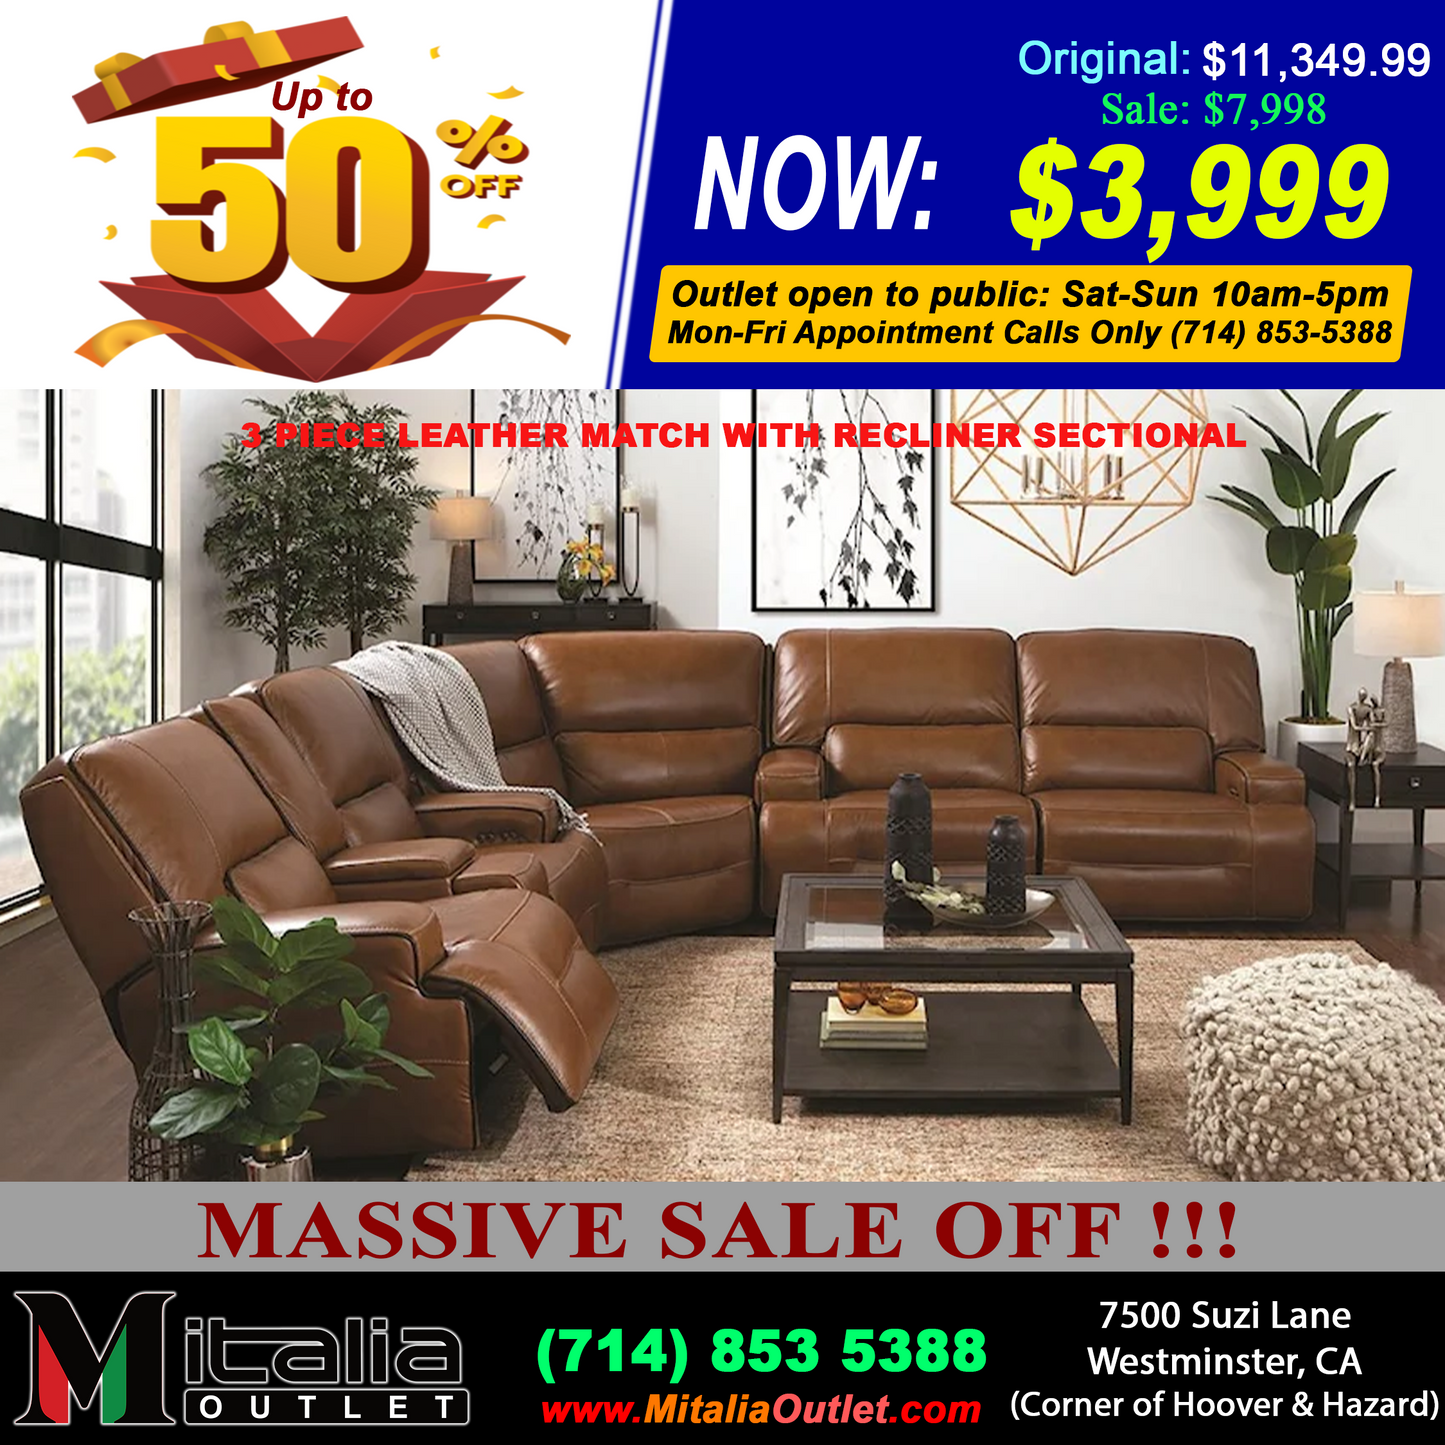 ManWah 3 Piece Leather Match with Recliner Sectional